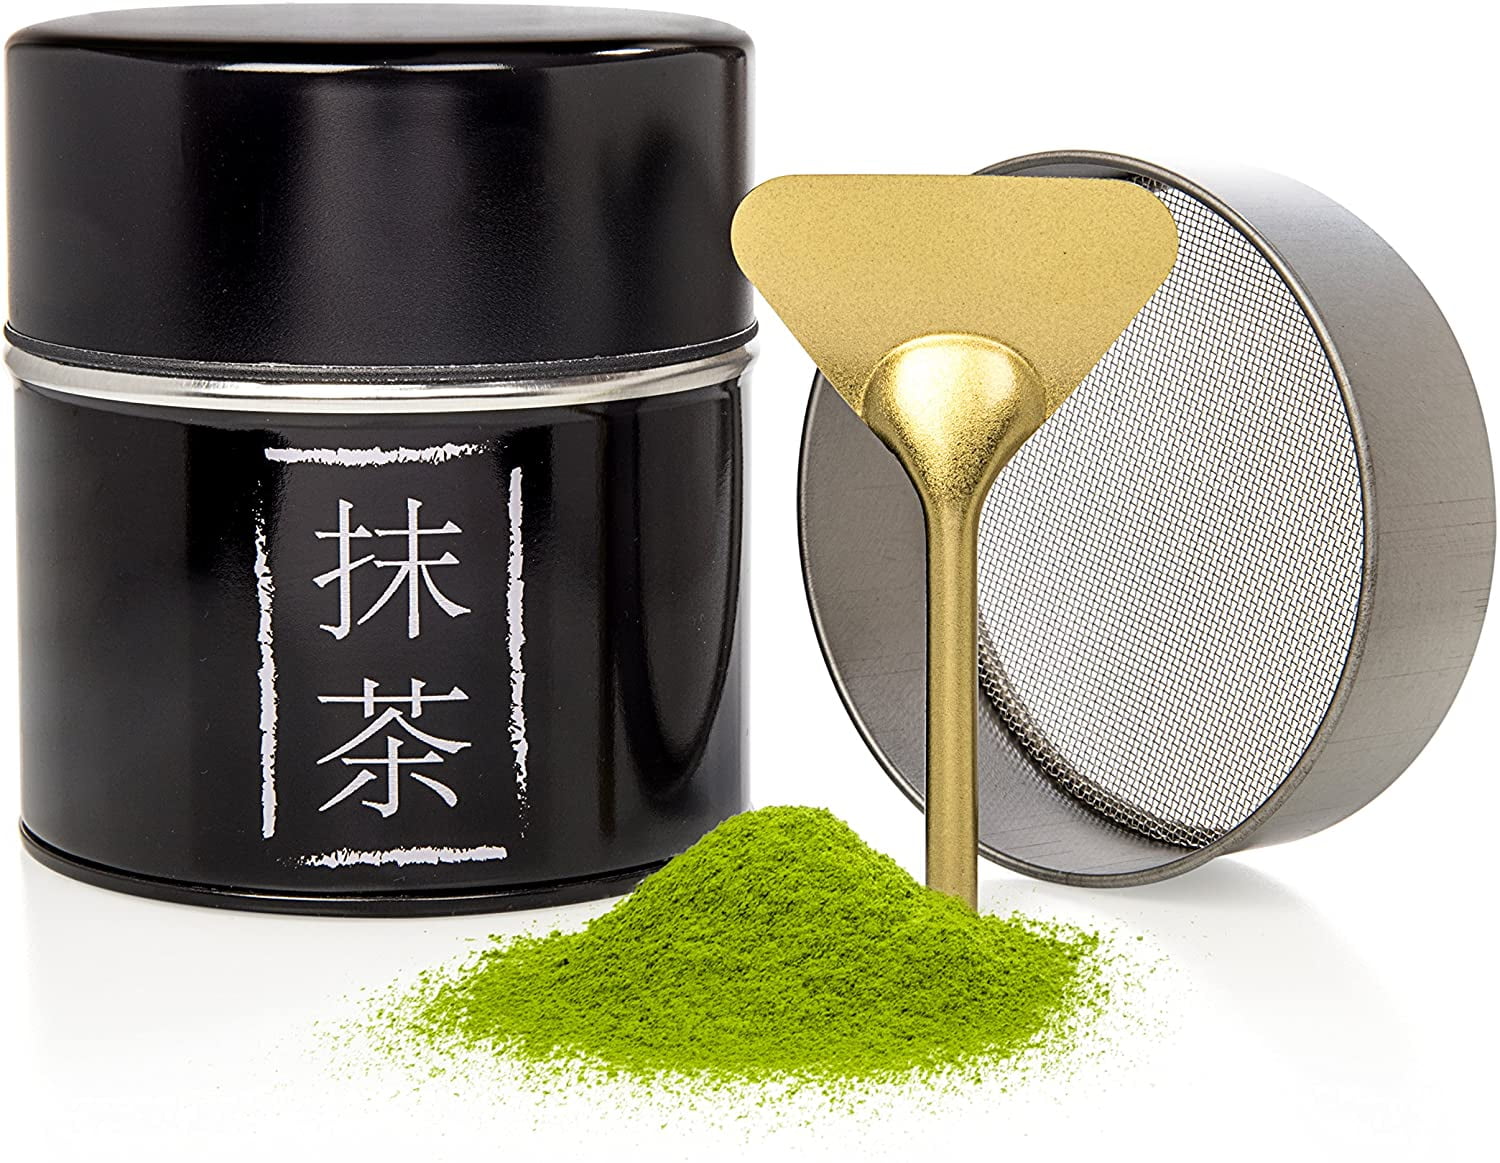 Tealyra 4-Ounce Removable Sifter Part Make Perfect Matcha Holds Up to 113g Matcha Plated Aluminum Tin and Stainless Steel Mesh Sifter and Scoop Matcha Green Tea Strainer Can 